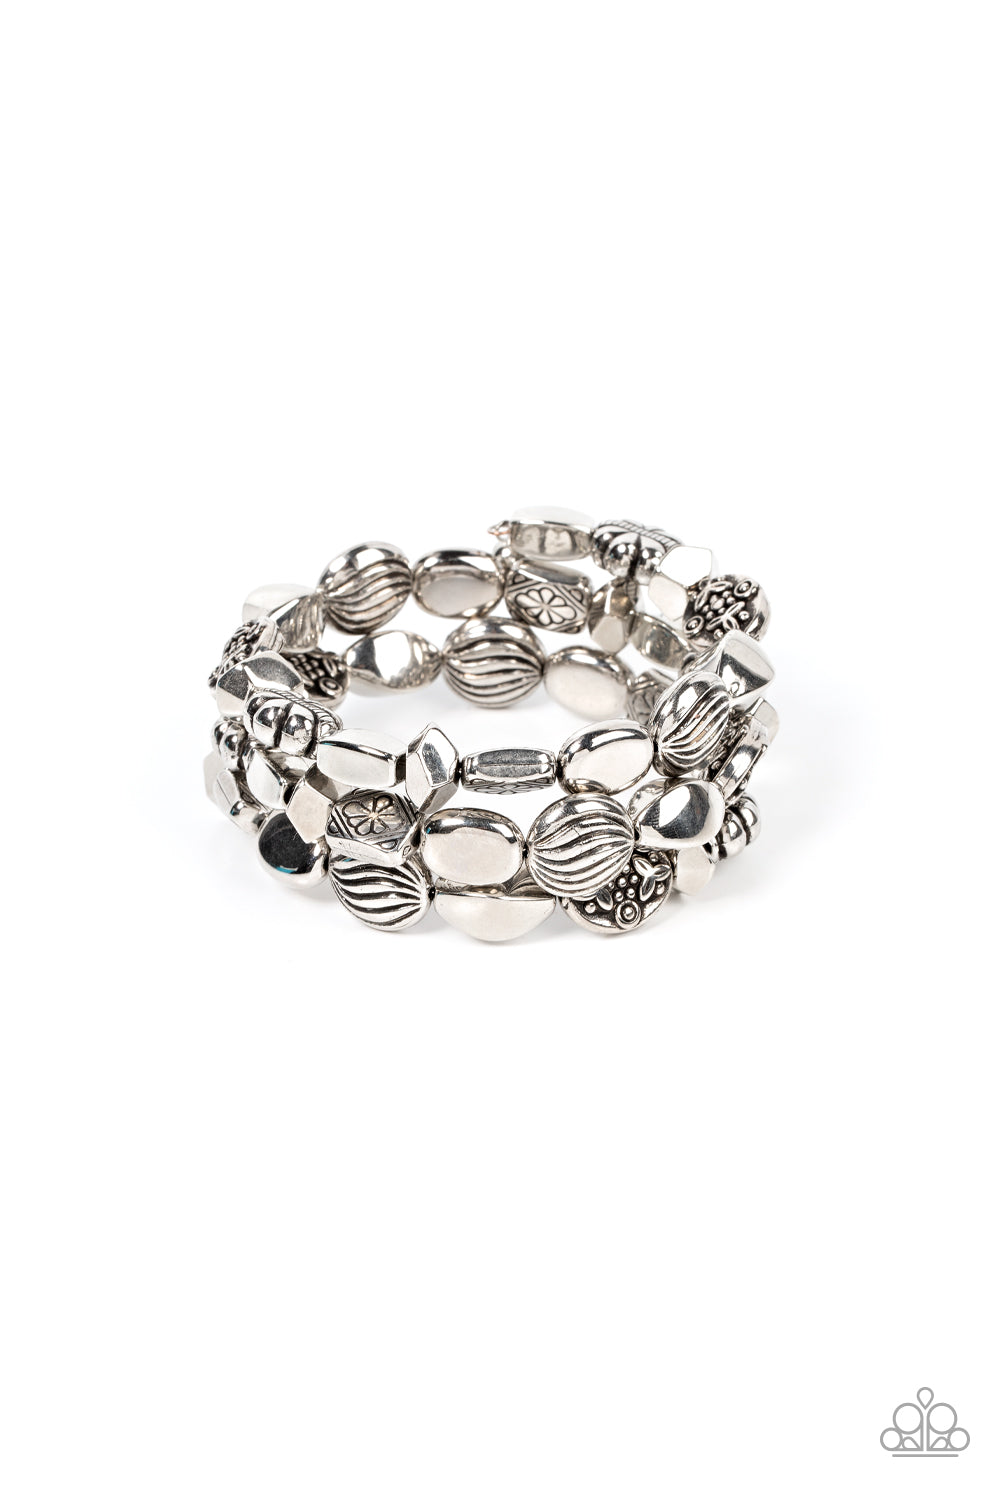 Charmingly Cottagecore Silver Bracelet - Paparazzi Accessories  An enchanting assortment of shiny silver, faceted, and floral embossed beads alternates along a coiled wire, creating a whimsical infinity style bracelet around the wrist.  Sold as one individual bracelet.